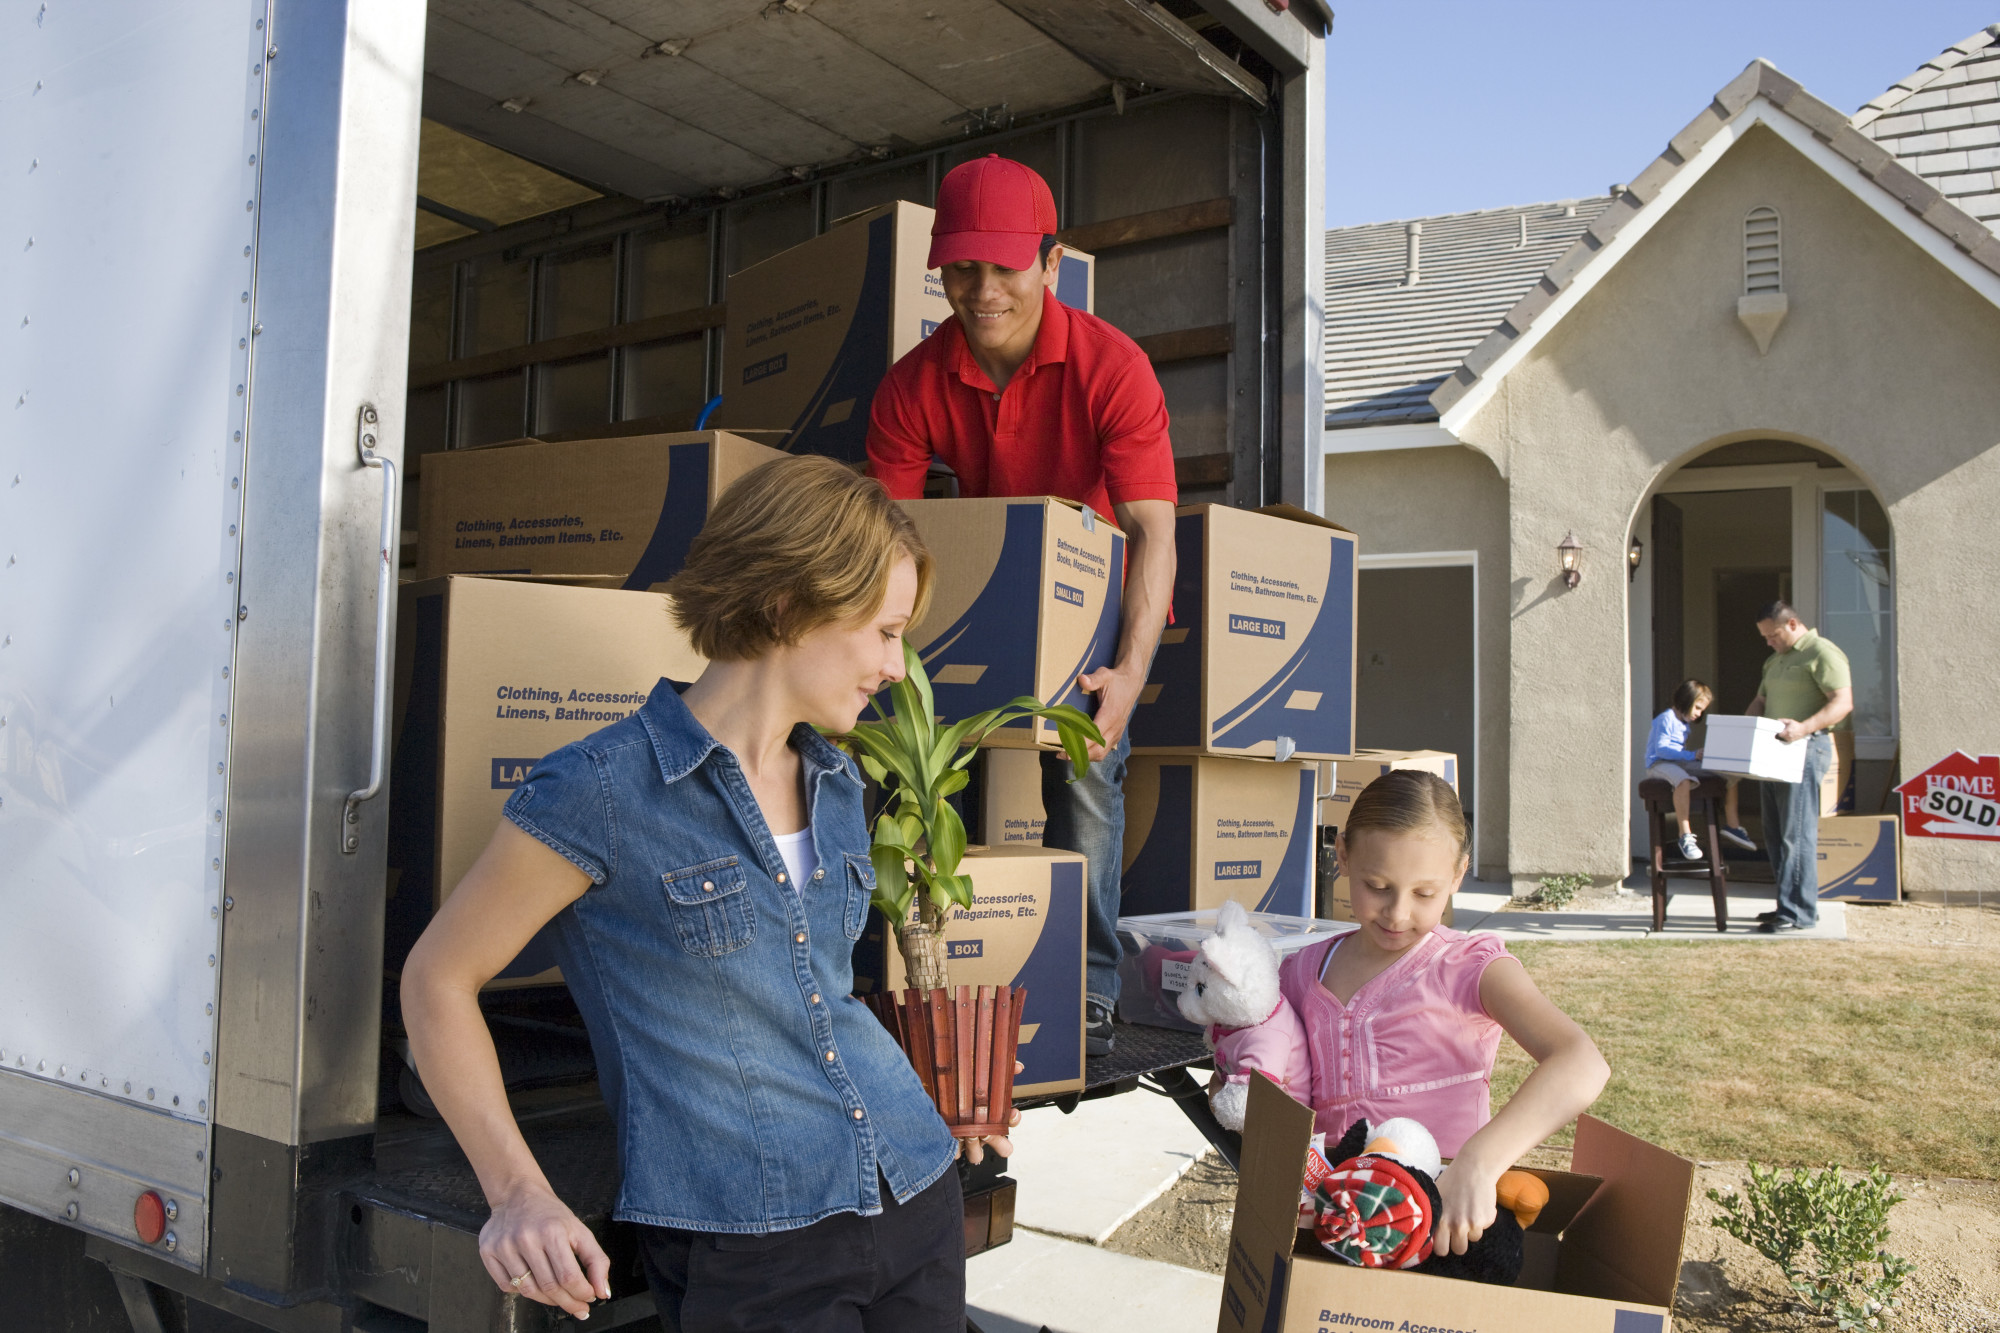 The Best Small Moving Company Marketing Ideas